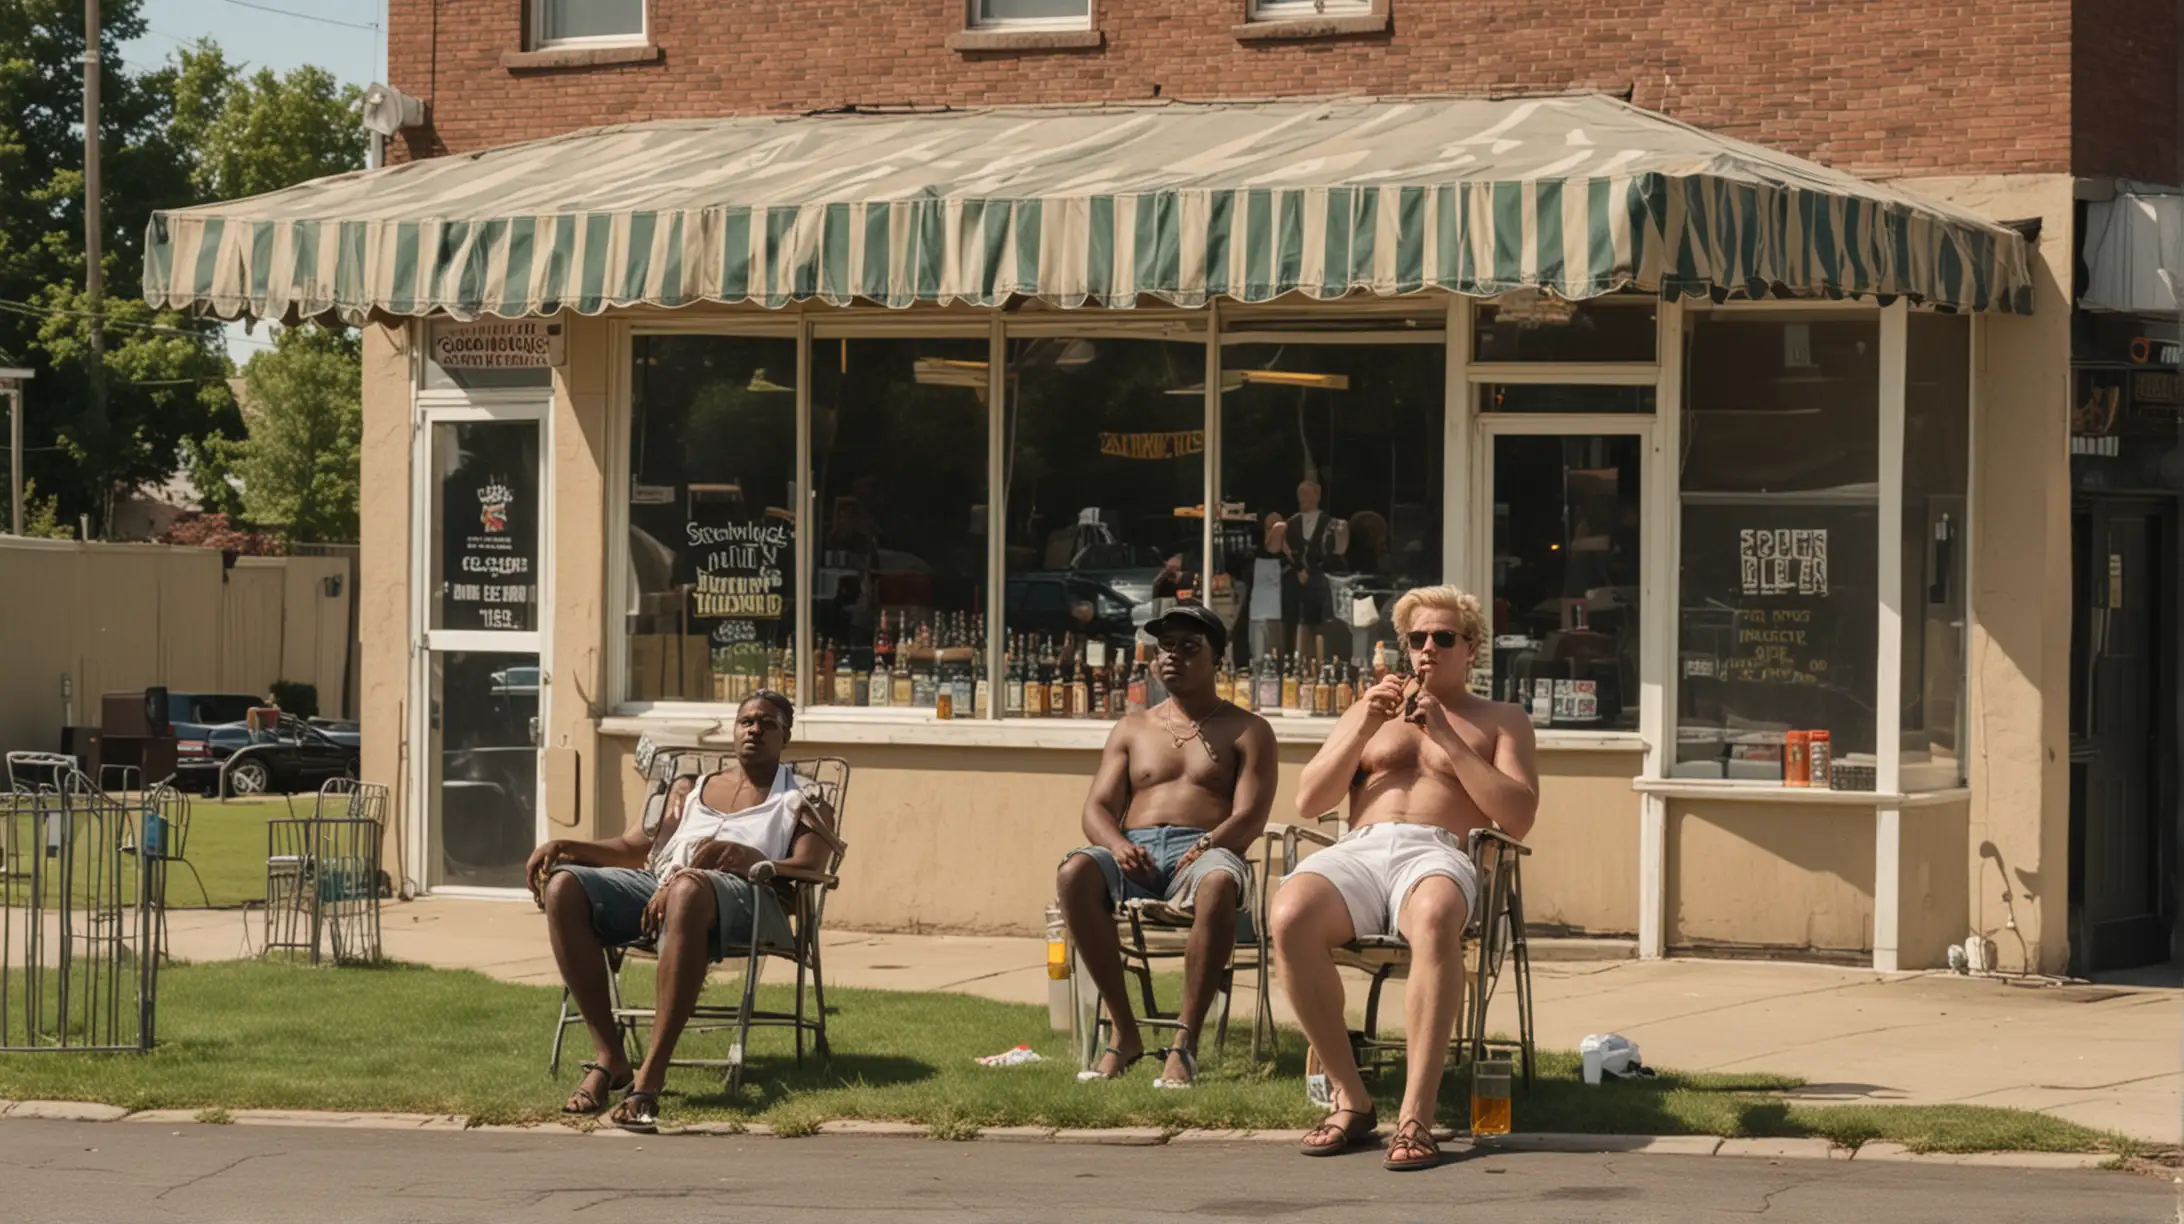 outside a scummy pawnshop on a hot day, two white men in their 30's standing out front smoking while one black man in his 30's sits in a lawn chair drinking a beer.